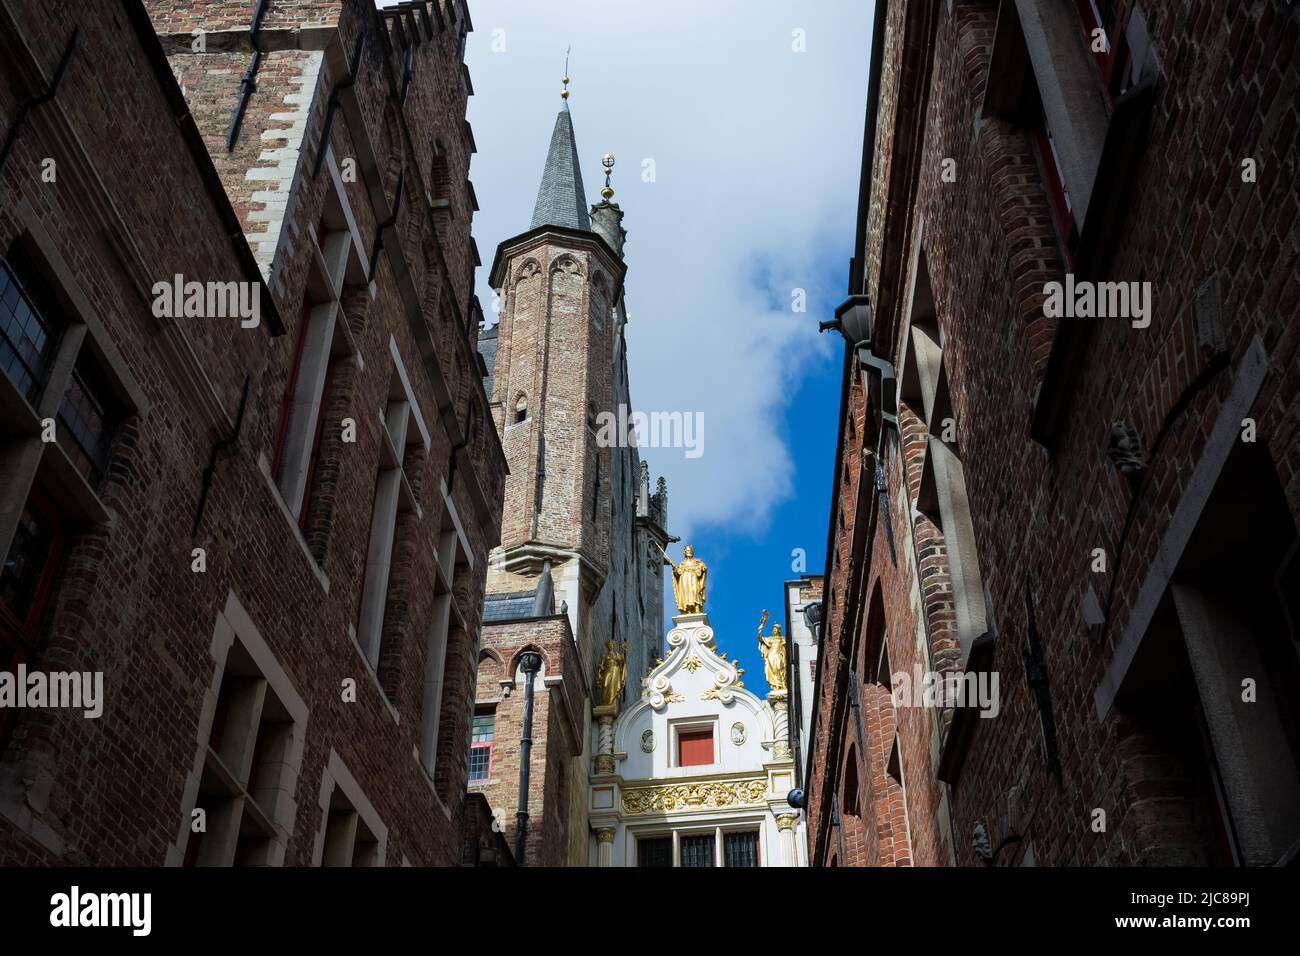 Architectural detail of Blinde-Ezelstraat (Blind Donkey Street), landmark next to Burg Square, former fortress in the city of Bruges, Belgium Stock Photo